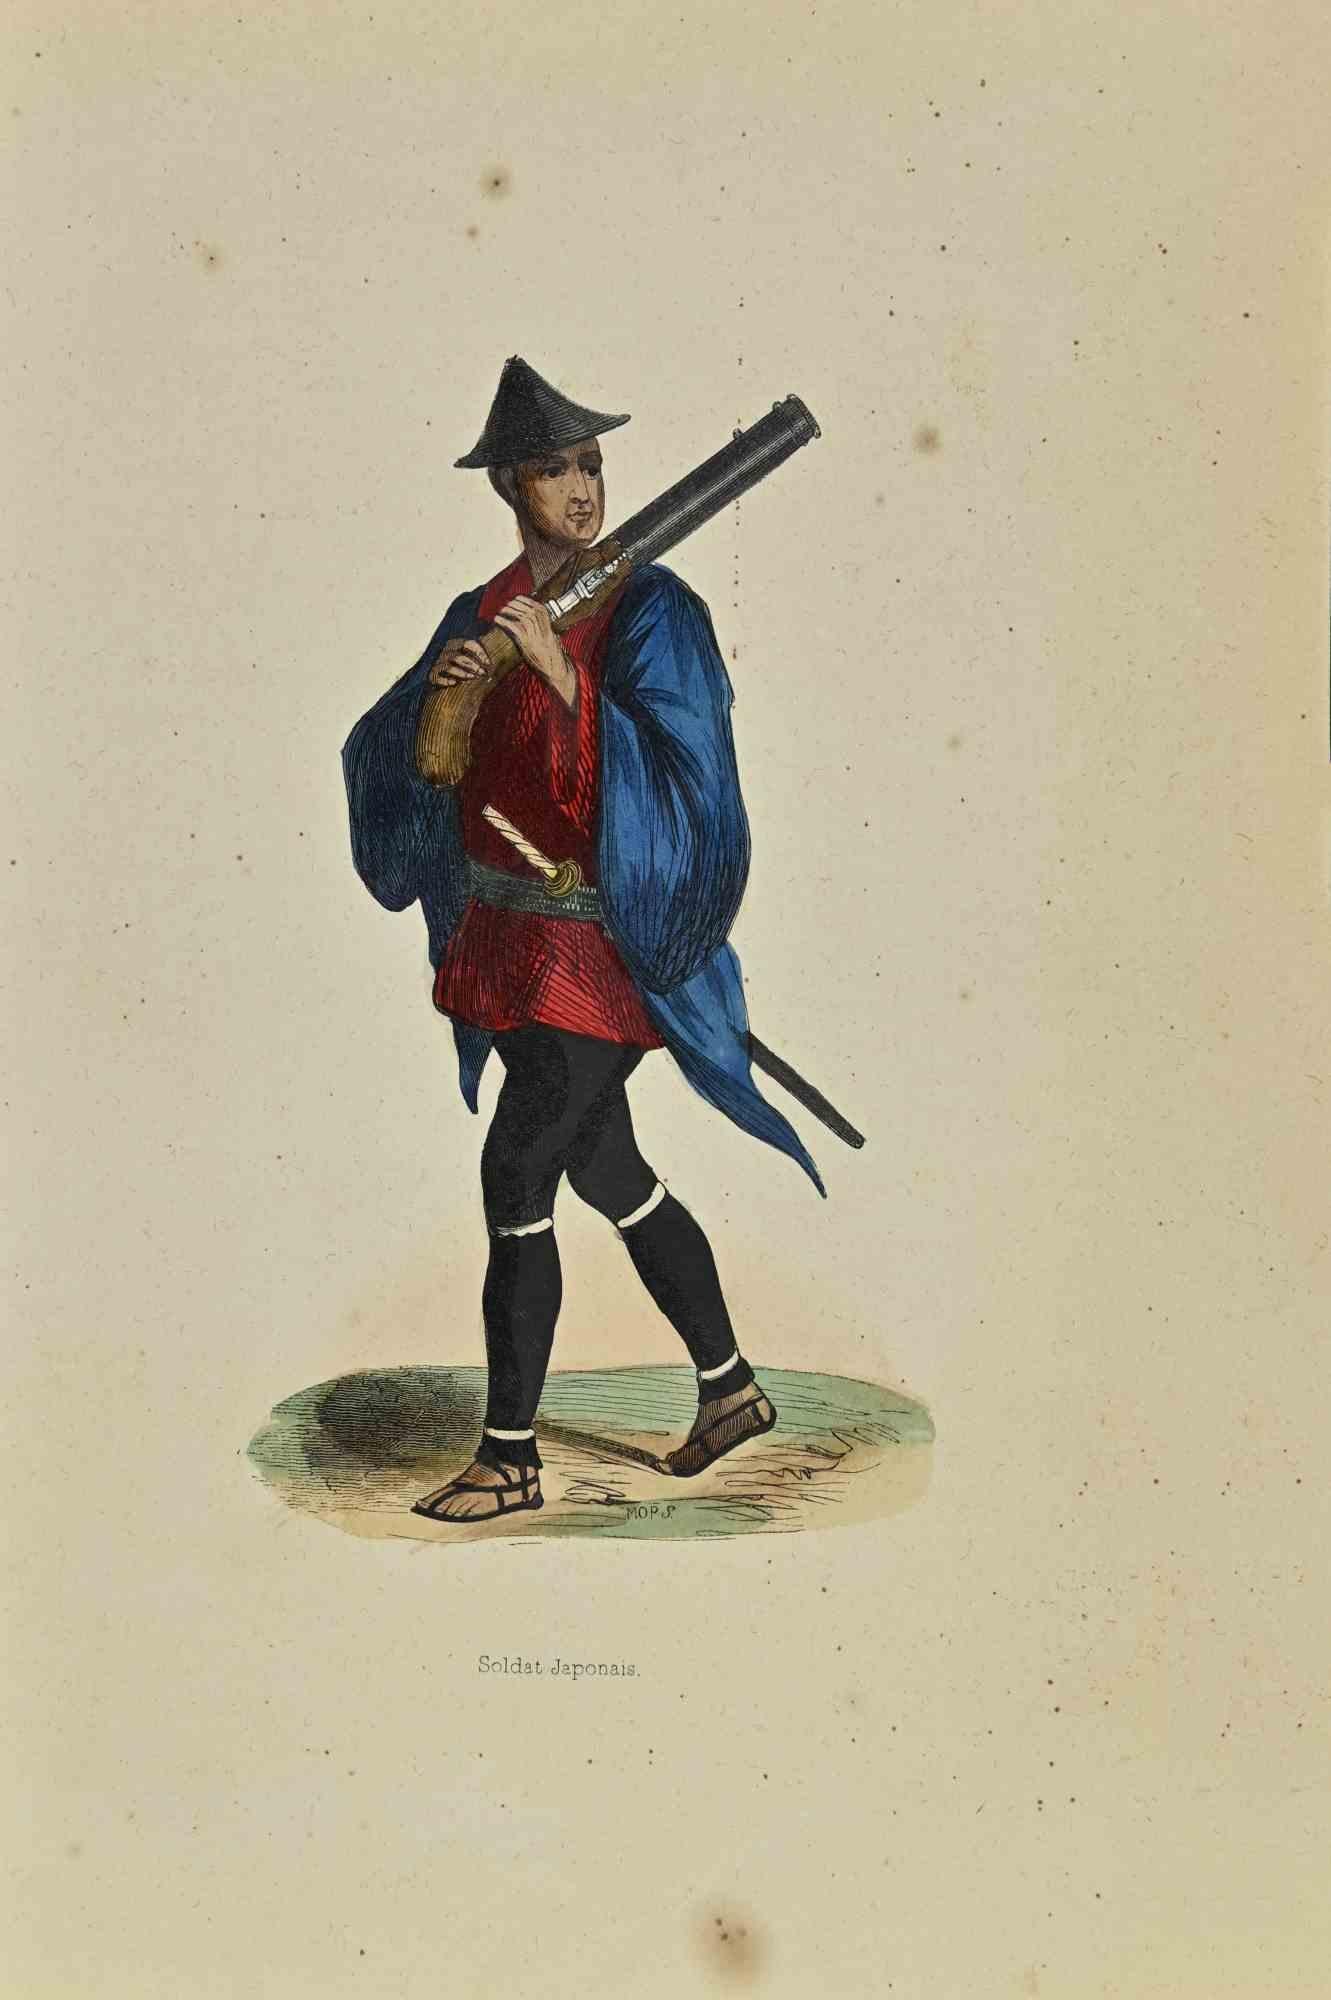 Japanese Soldier is a lithograph made by Auguste Wahlen in 1844.

Hand colored.

Good condition.

At the center of the artwork is the original title "Soldat Japonais".

The work is part of Suite Moeurs, usages et costumes de tous les peuples du